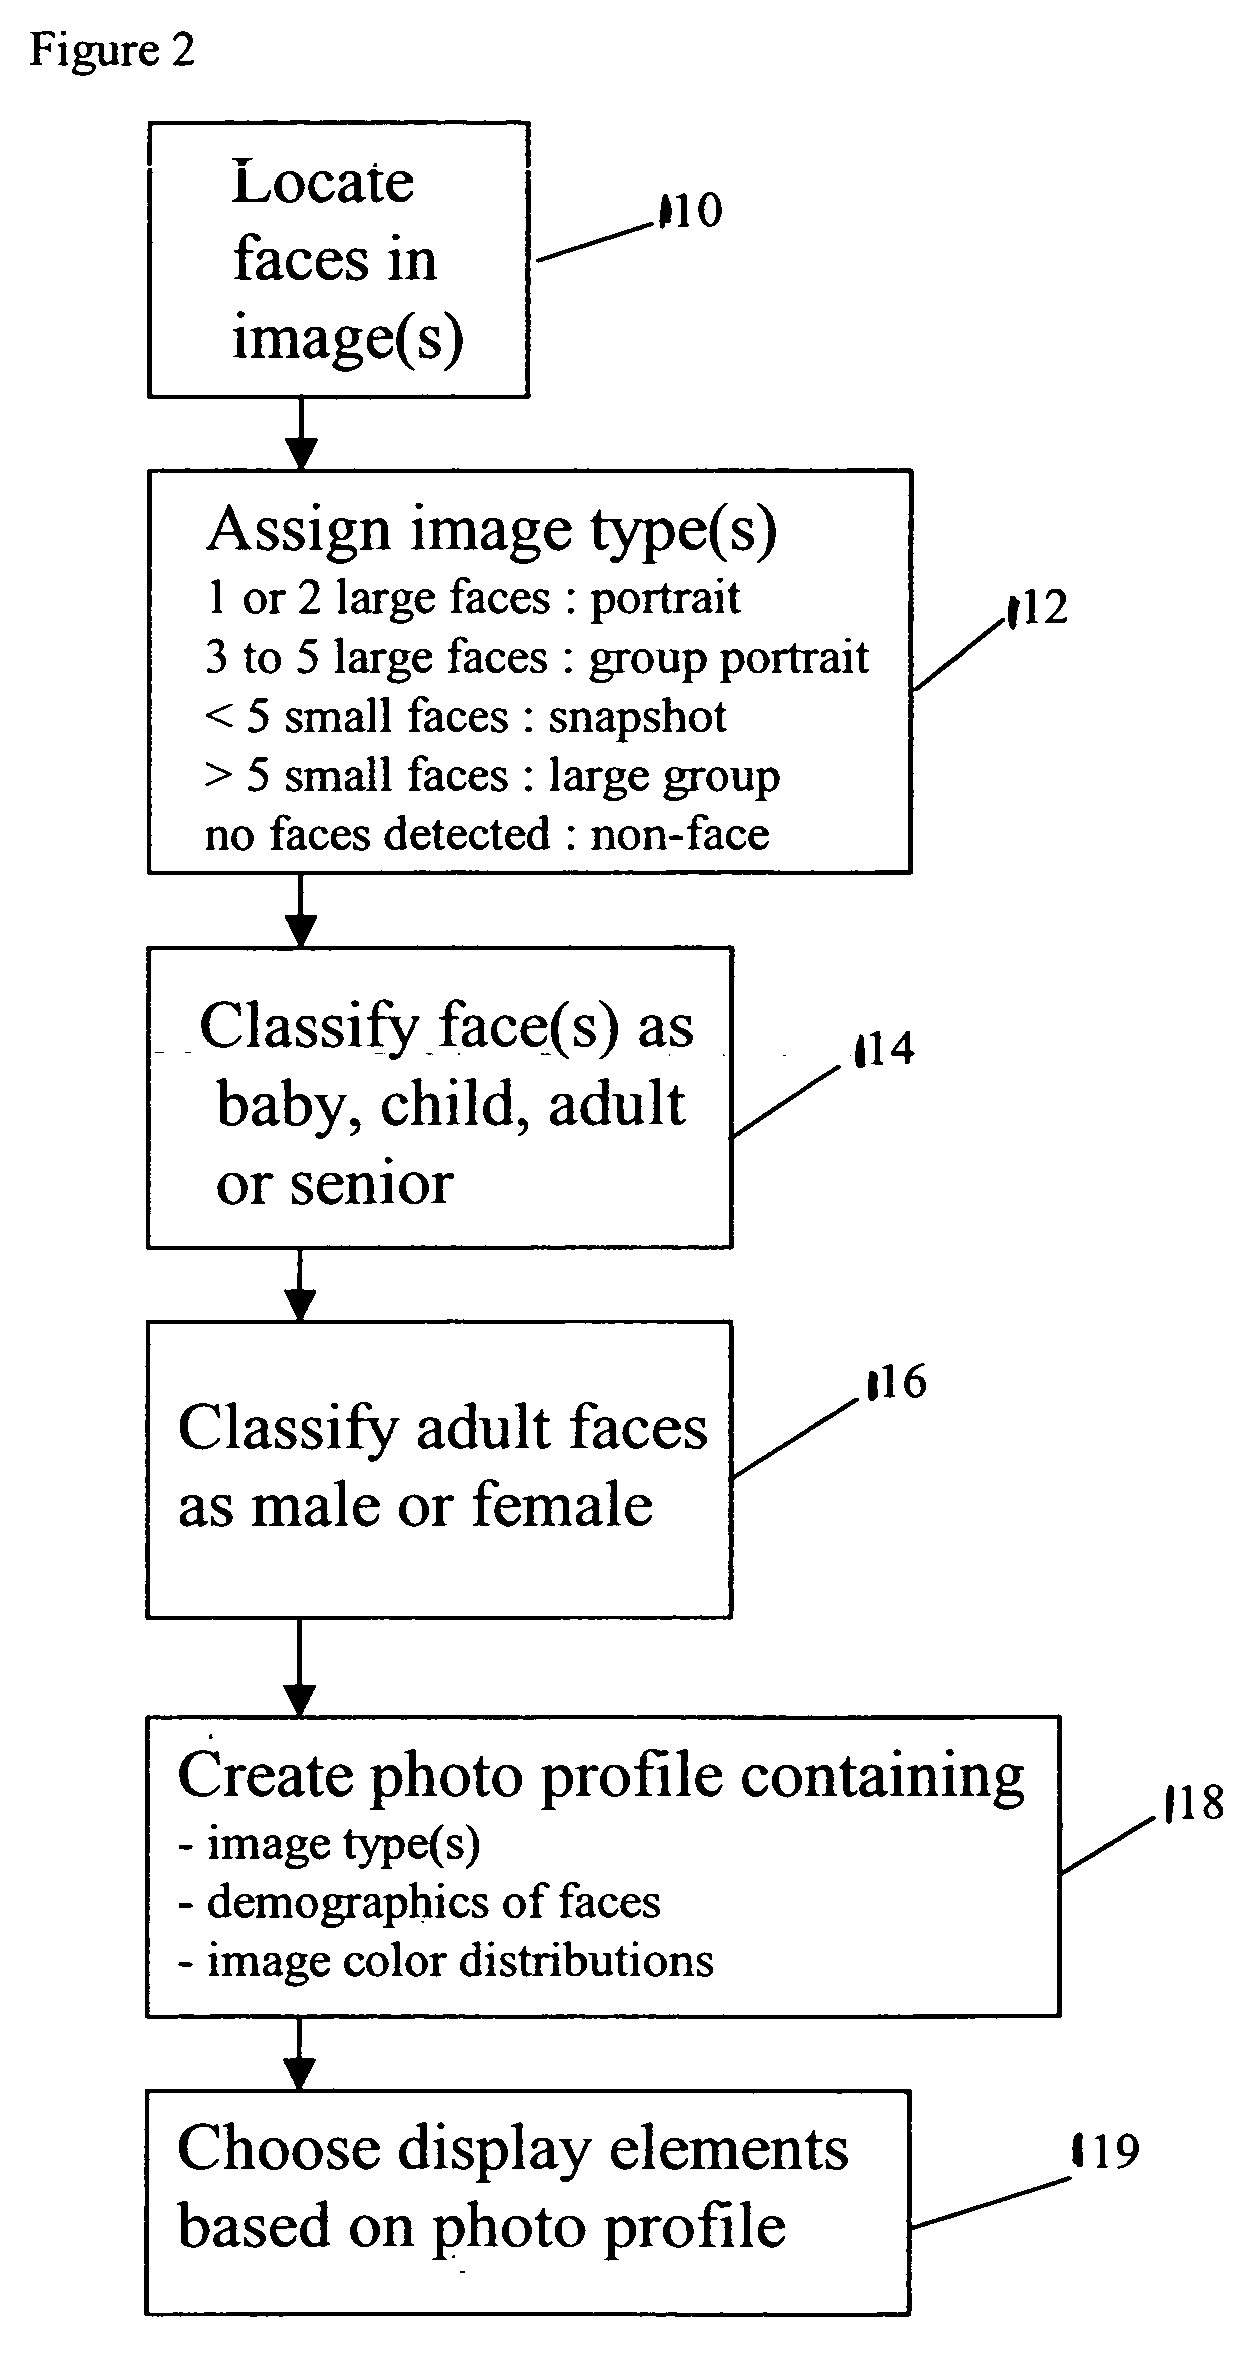 Method for generating customized photo album pages and prints based on people and gender profiles